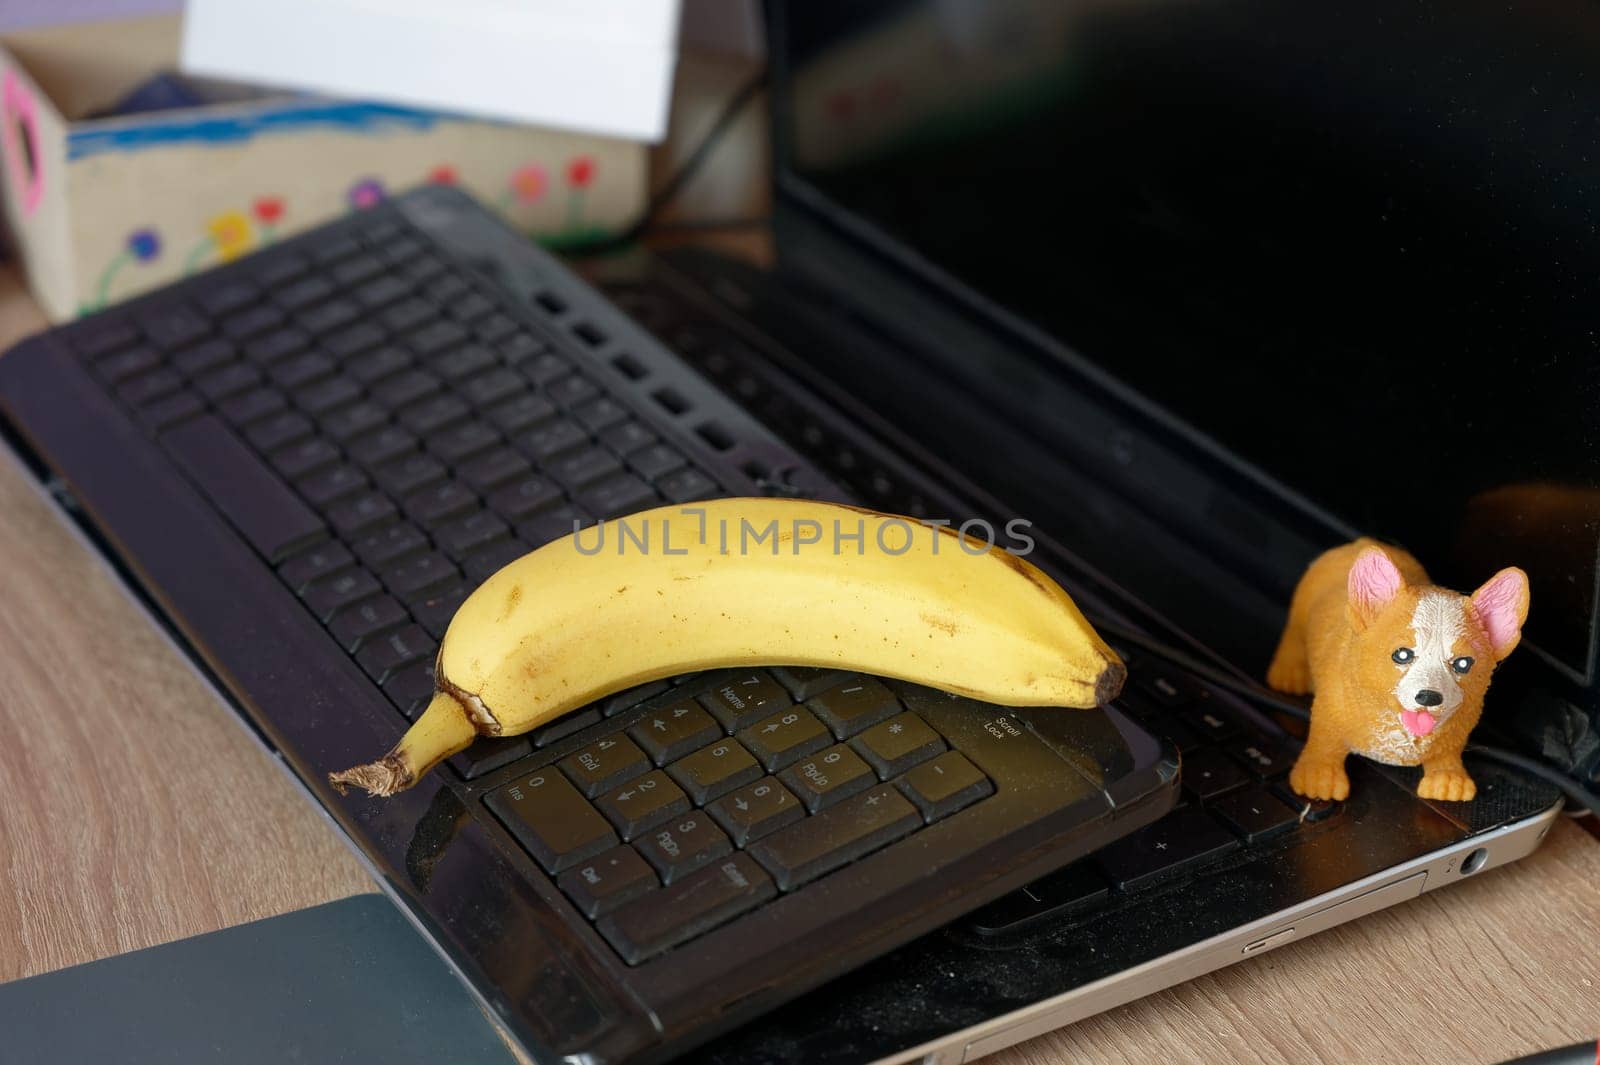 A beautiful fresh banana on a work table at home or in the office with a computer or laptop - notebook. by Montypeter